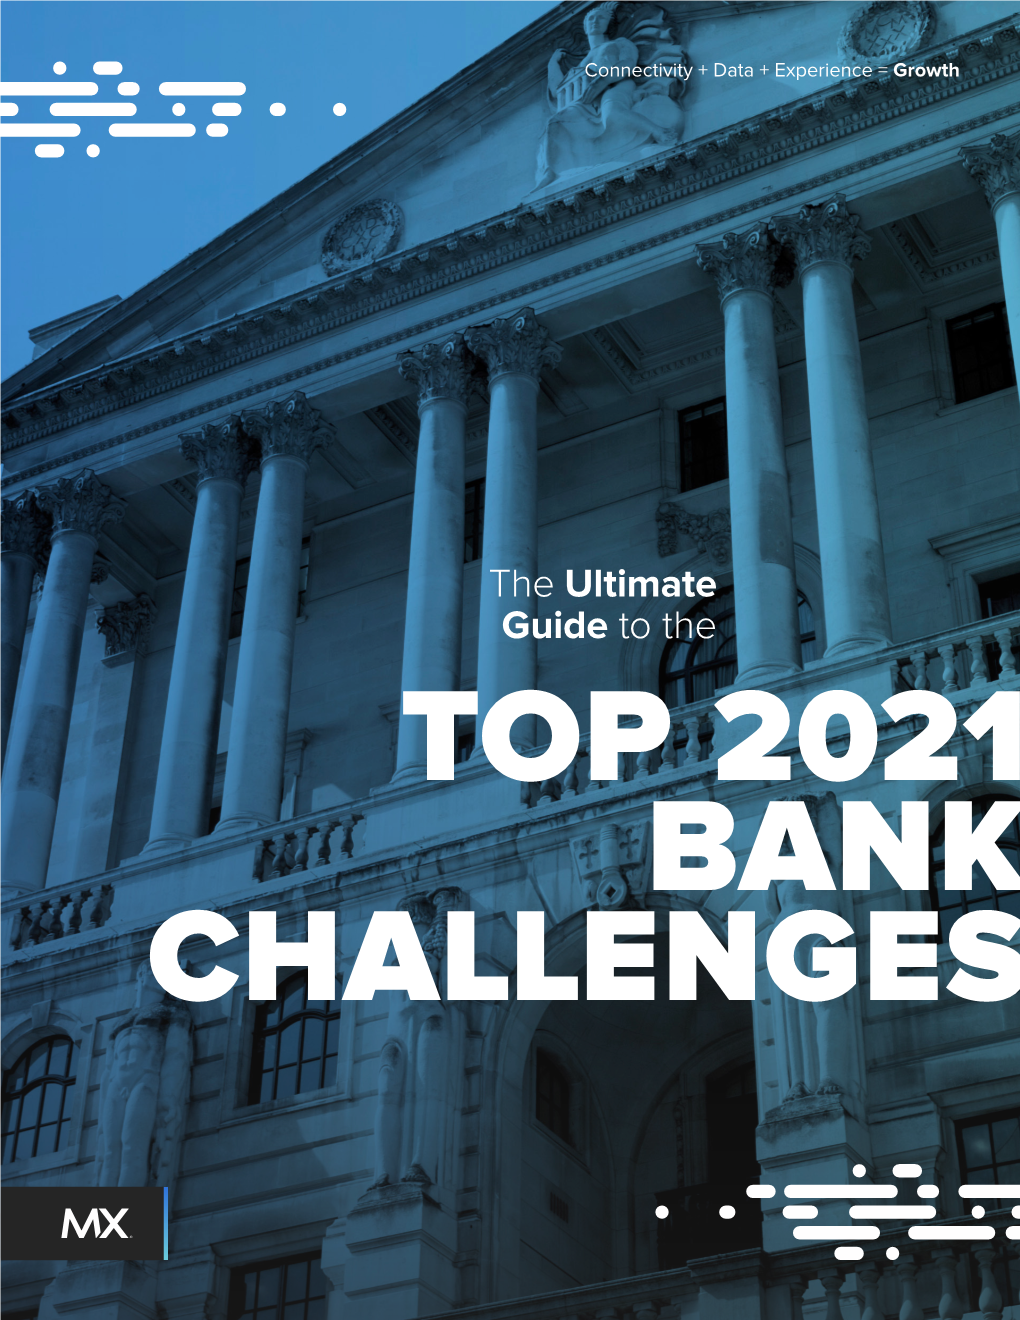 The Ultimate Guide to the TOP 2021 BANK CHALLENGES